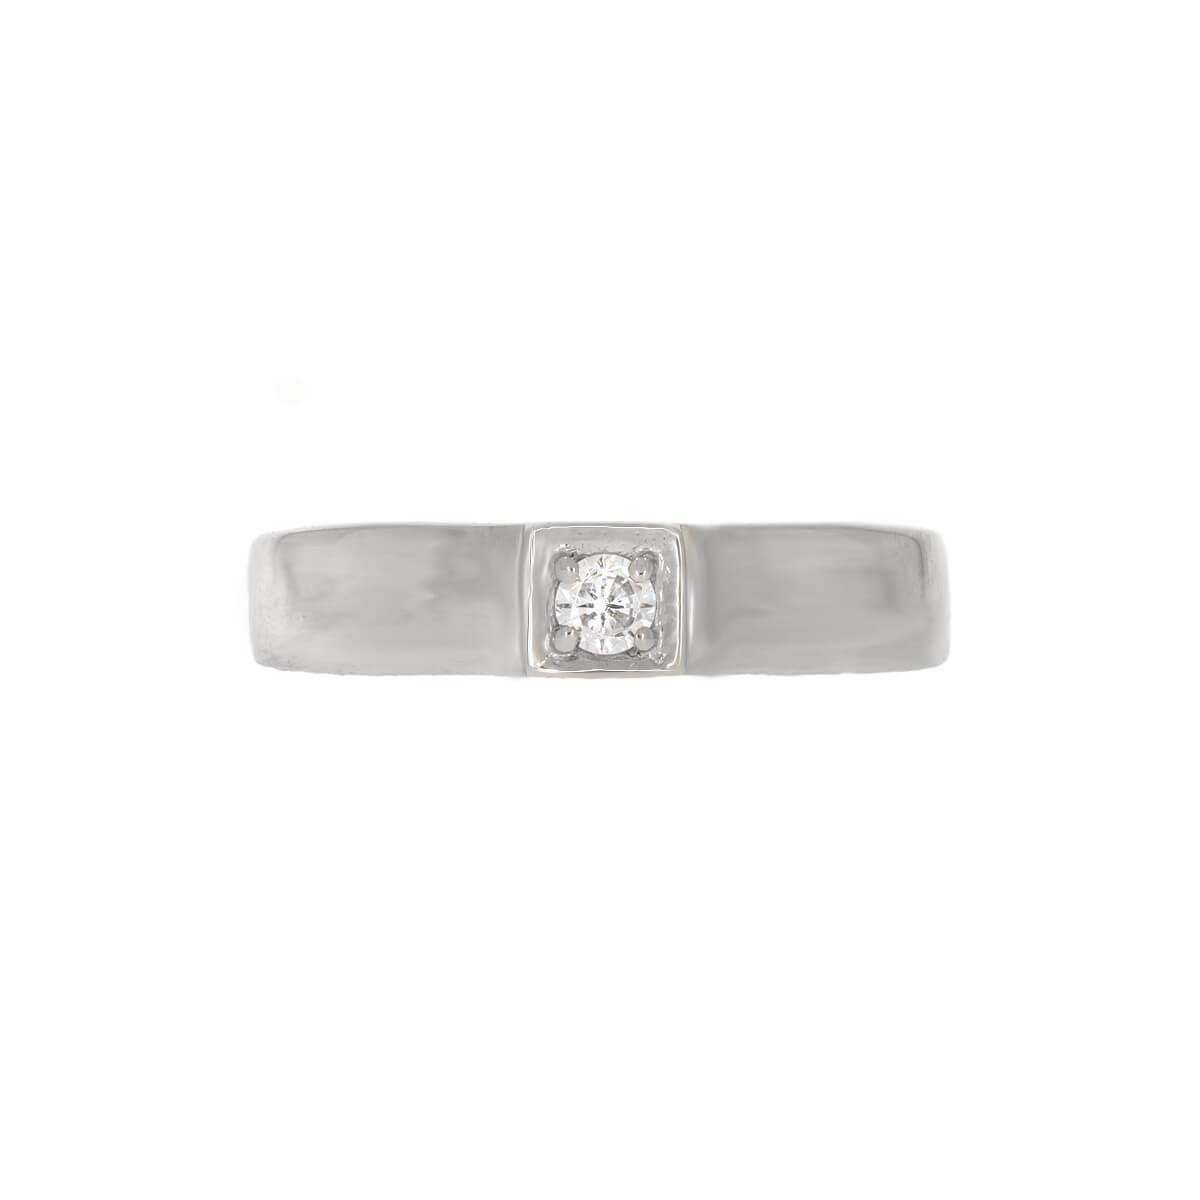 Superficial Silver Ring